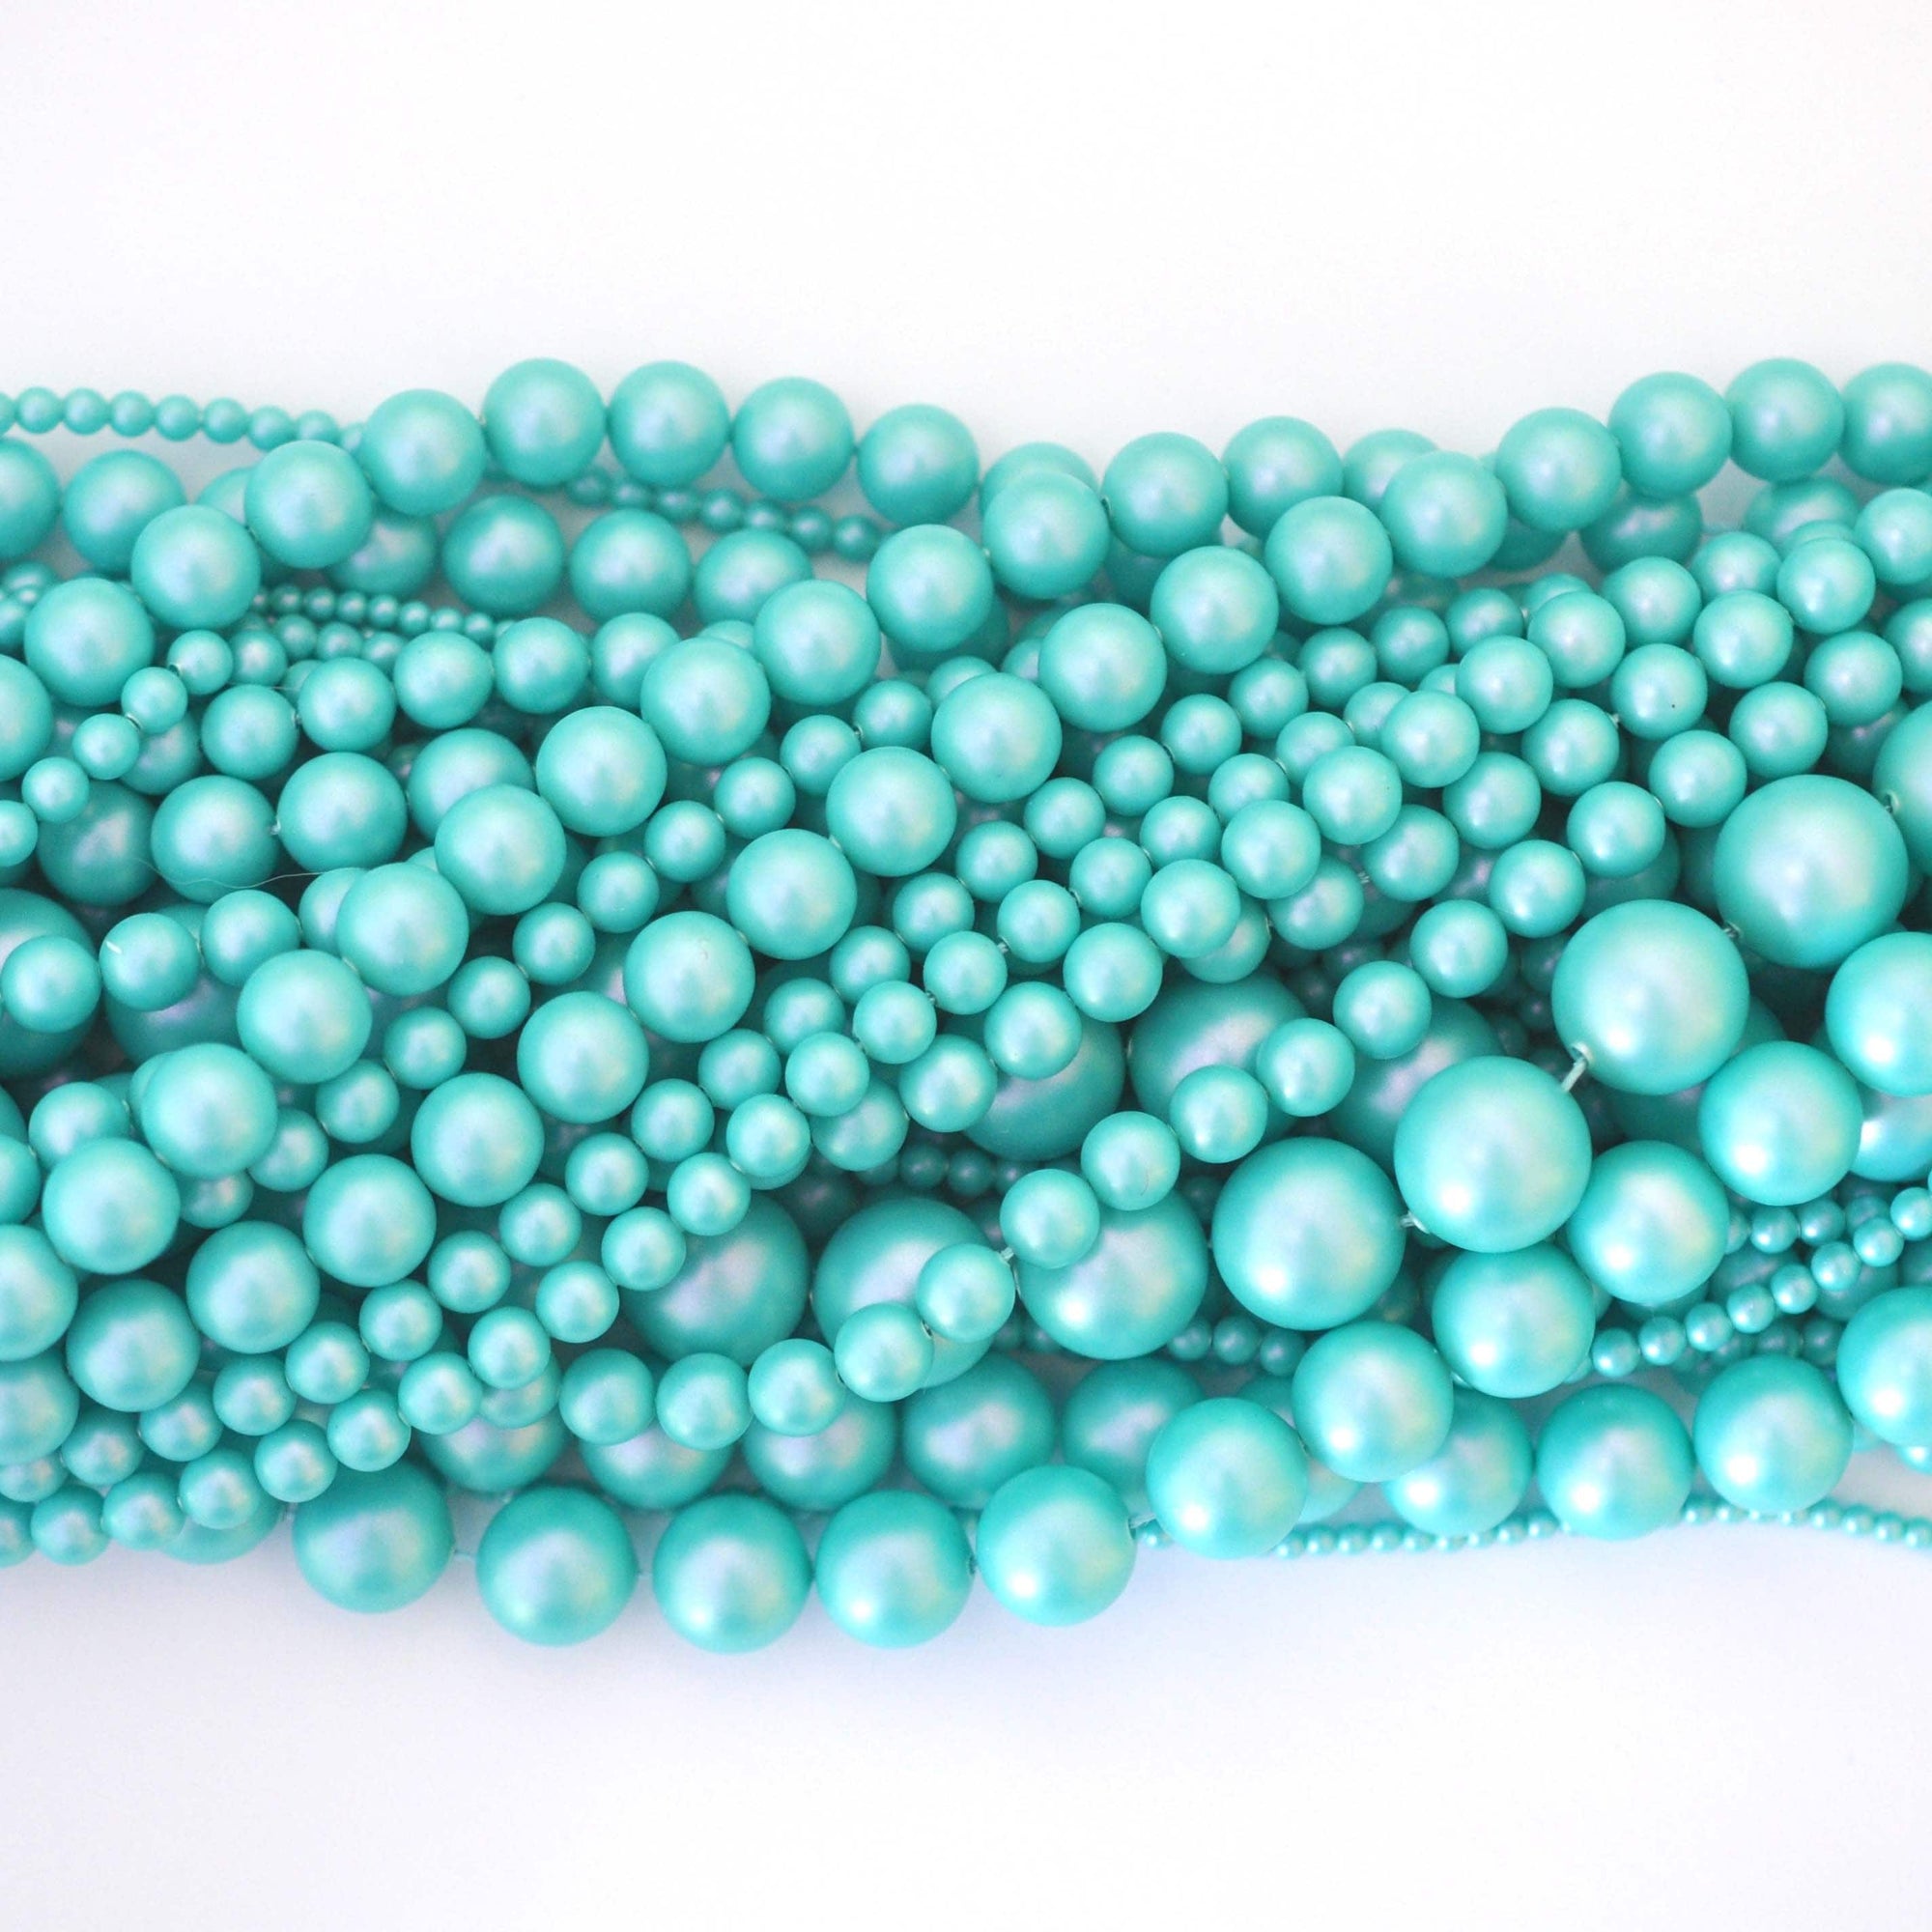 Iridescent Light Turquoise 5810 Barton Crystal Round Pearl Beads 2mm